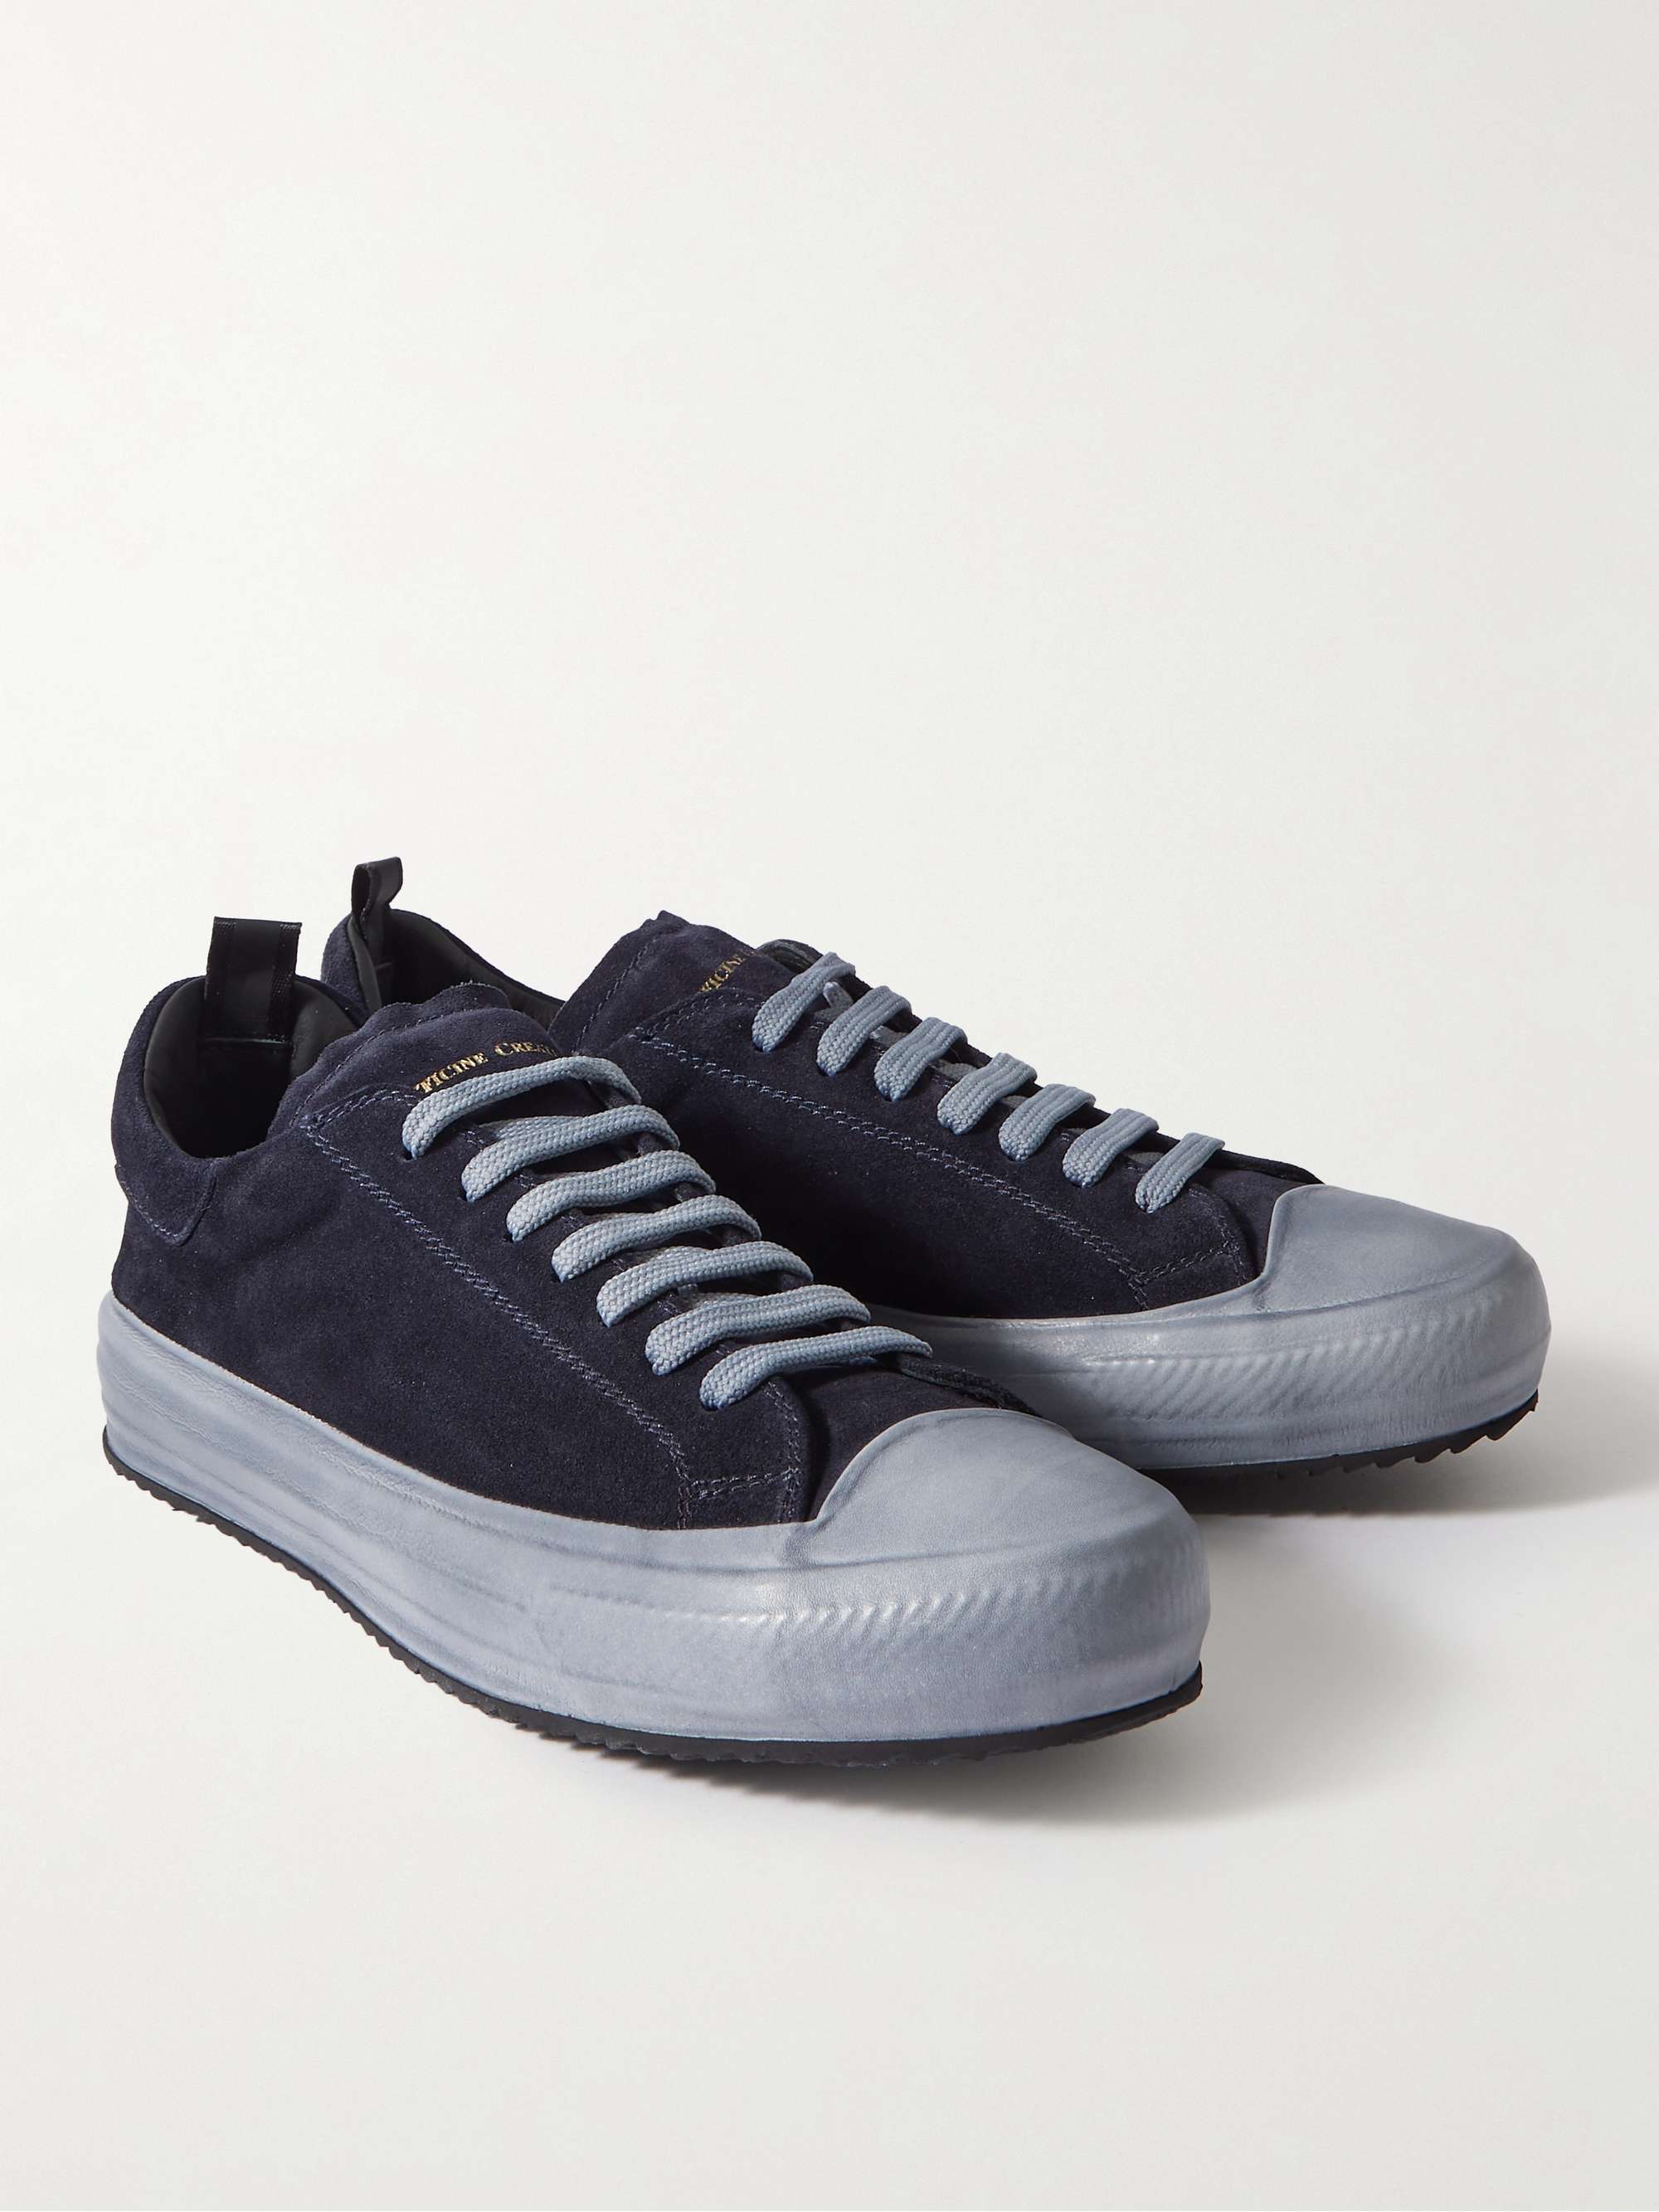 OFFICINE CREATIVE Mes Suede Sneakers for Men | MR PORTER